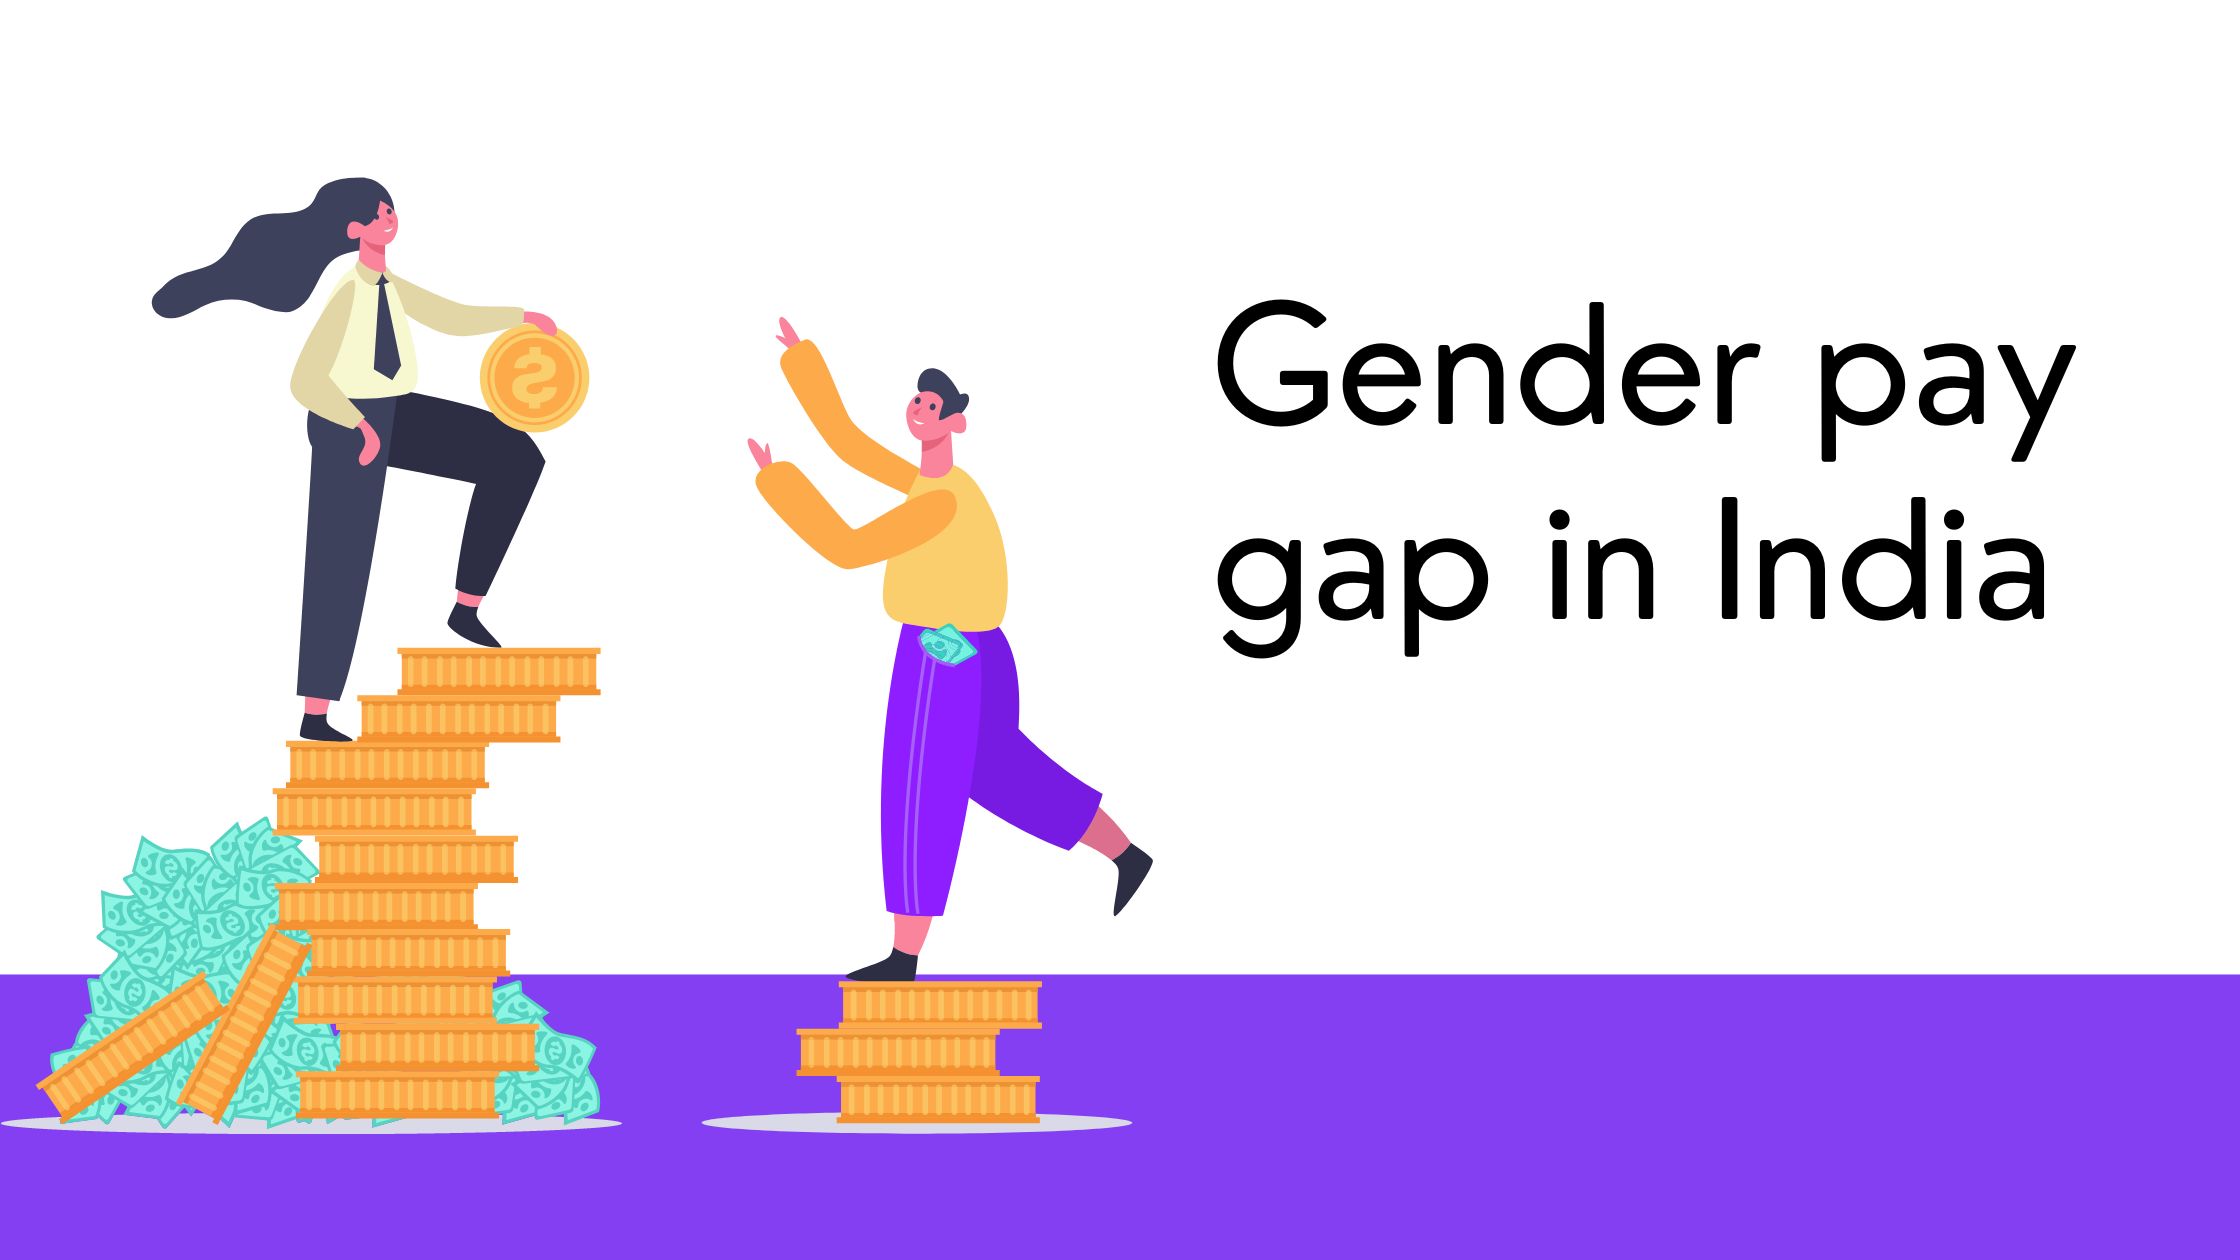 The Gender Pay Gap in India